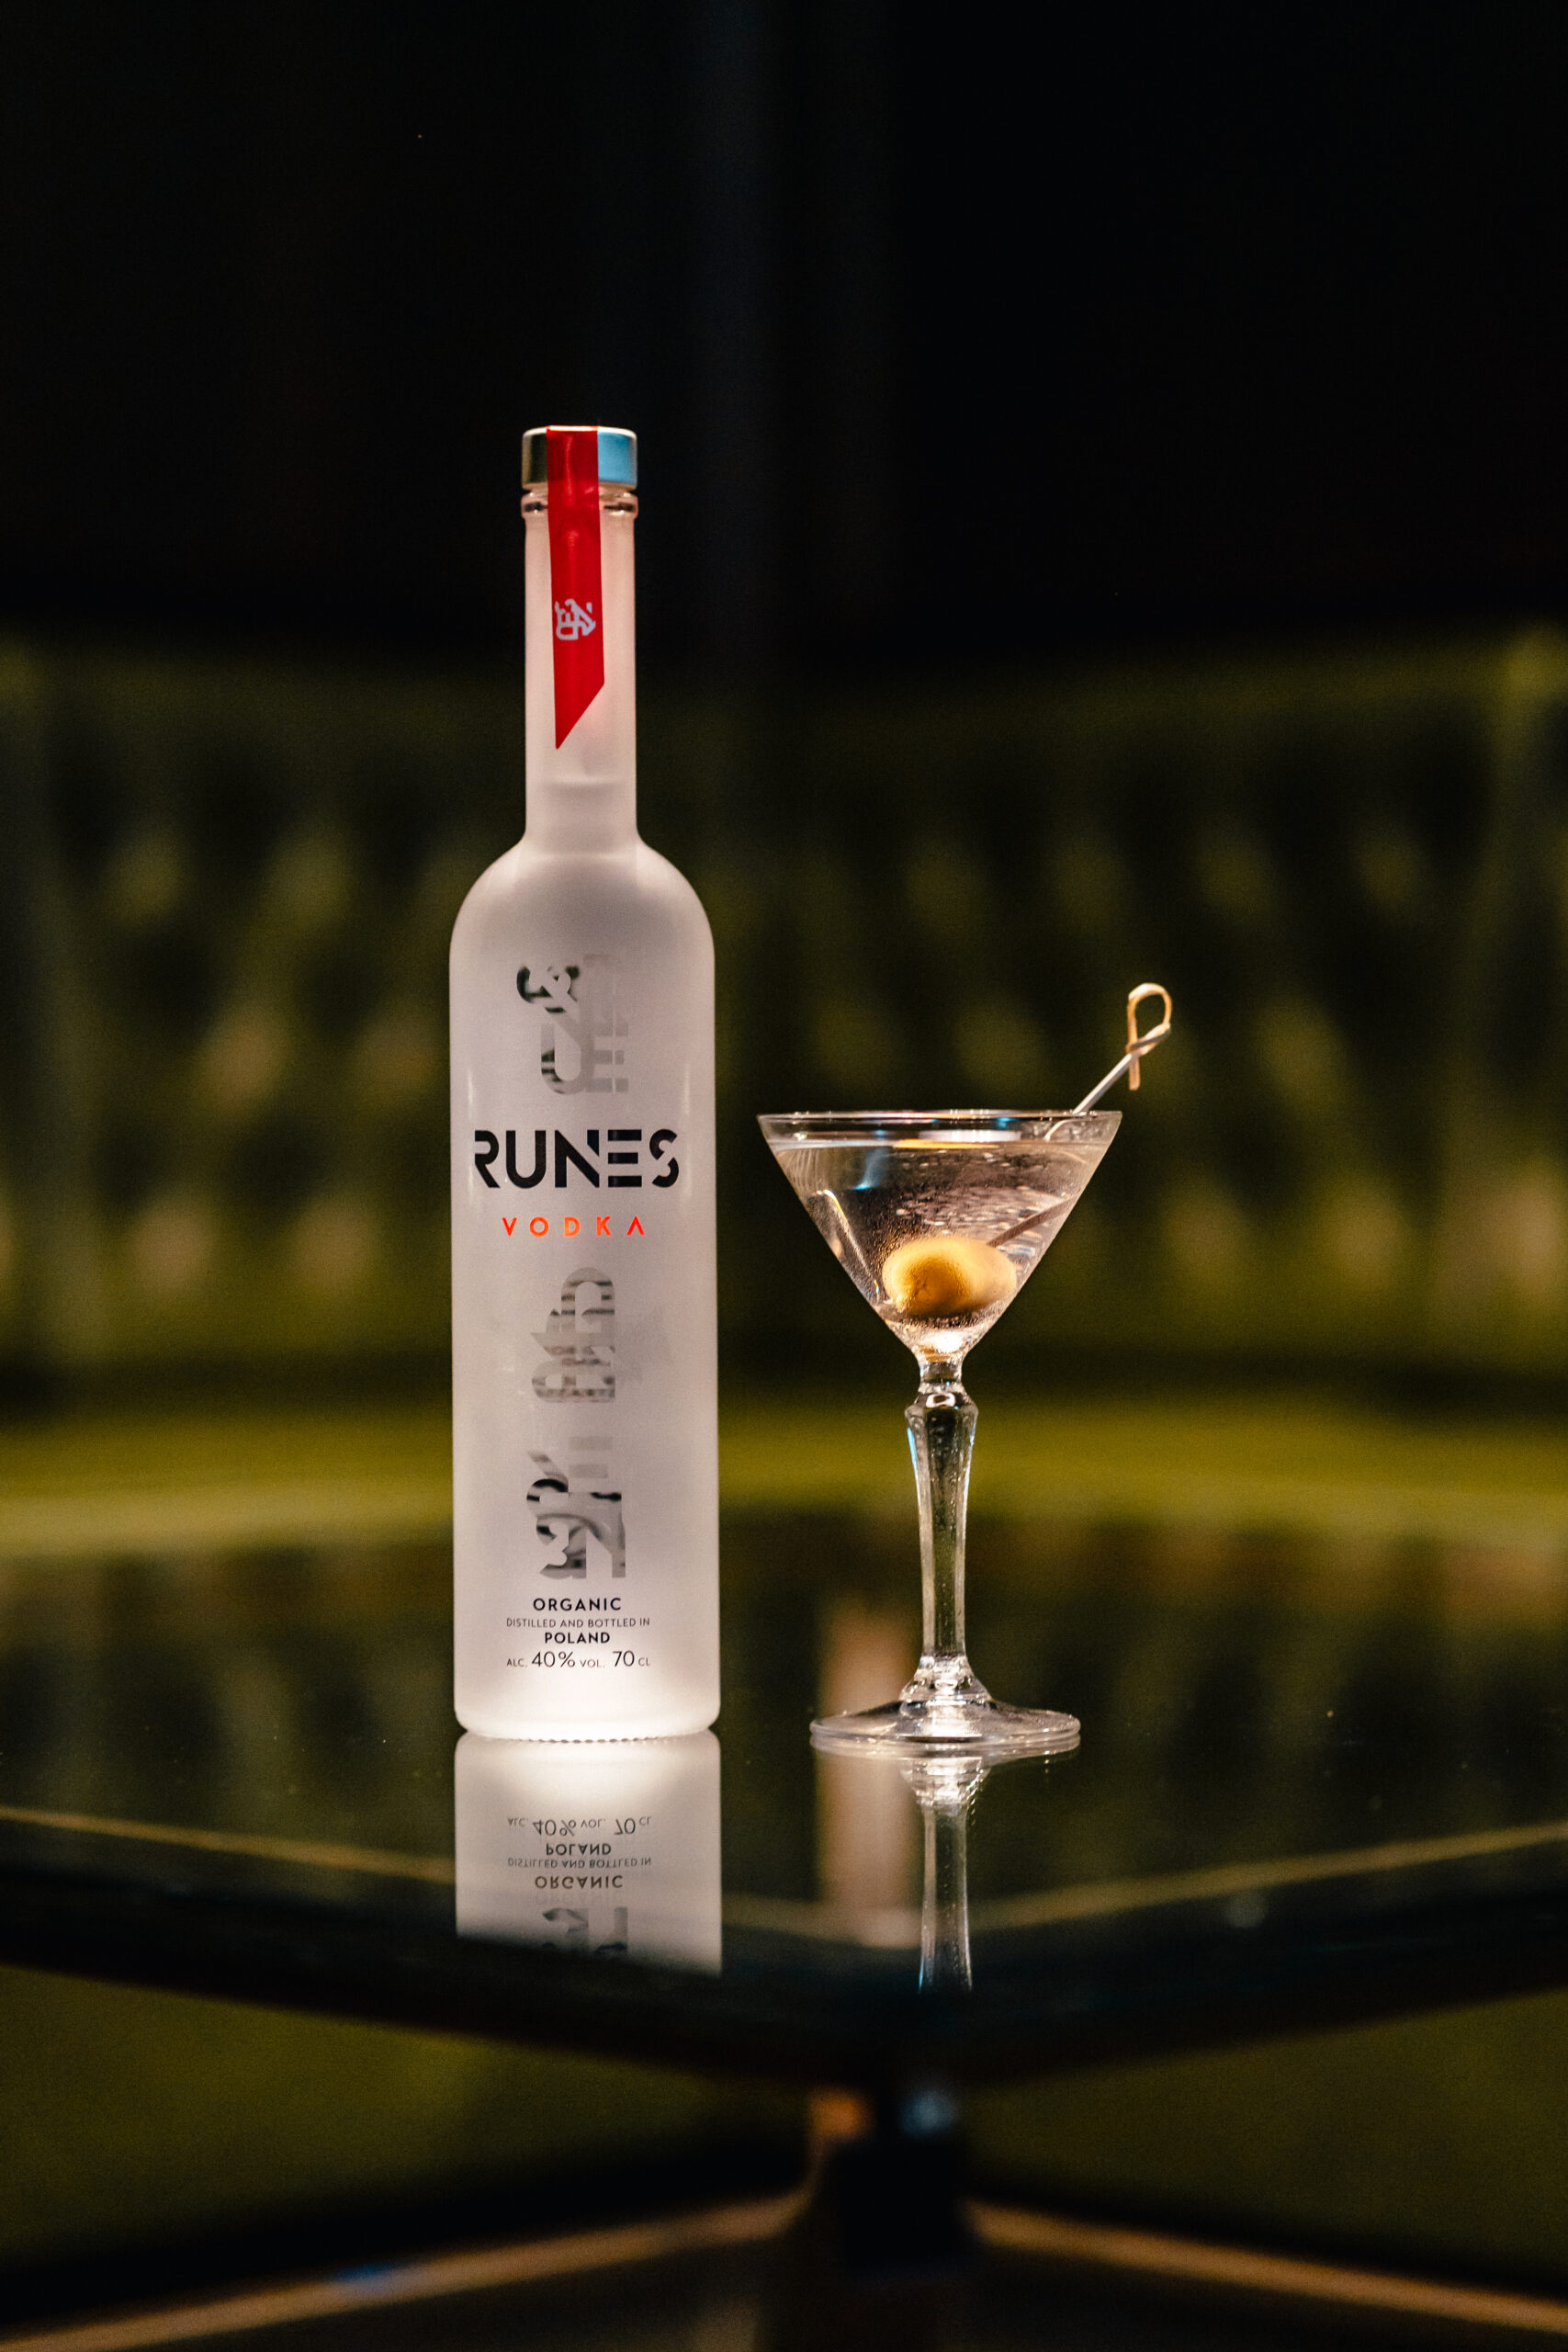 A Vodka Martini is a cocktail made with RUNES vodka and vermouth, a variation of a martini cocktail. A Vodka Martini is made by combining vodka, dry vermouth and ice in a cocktail shaker or mixing glass.